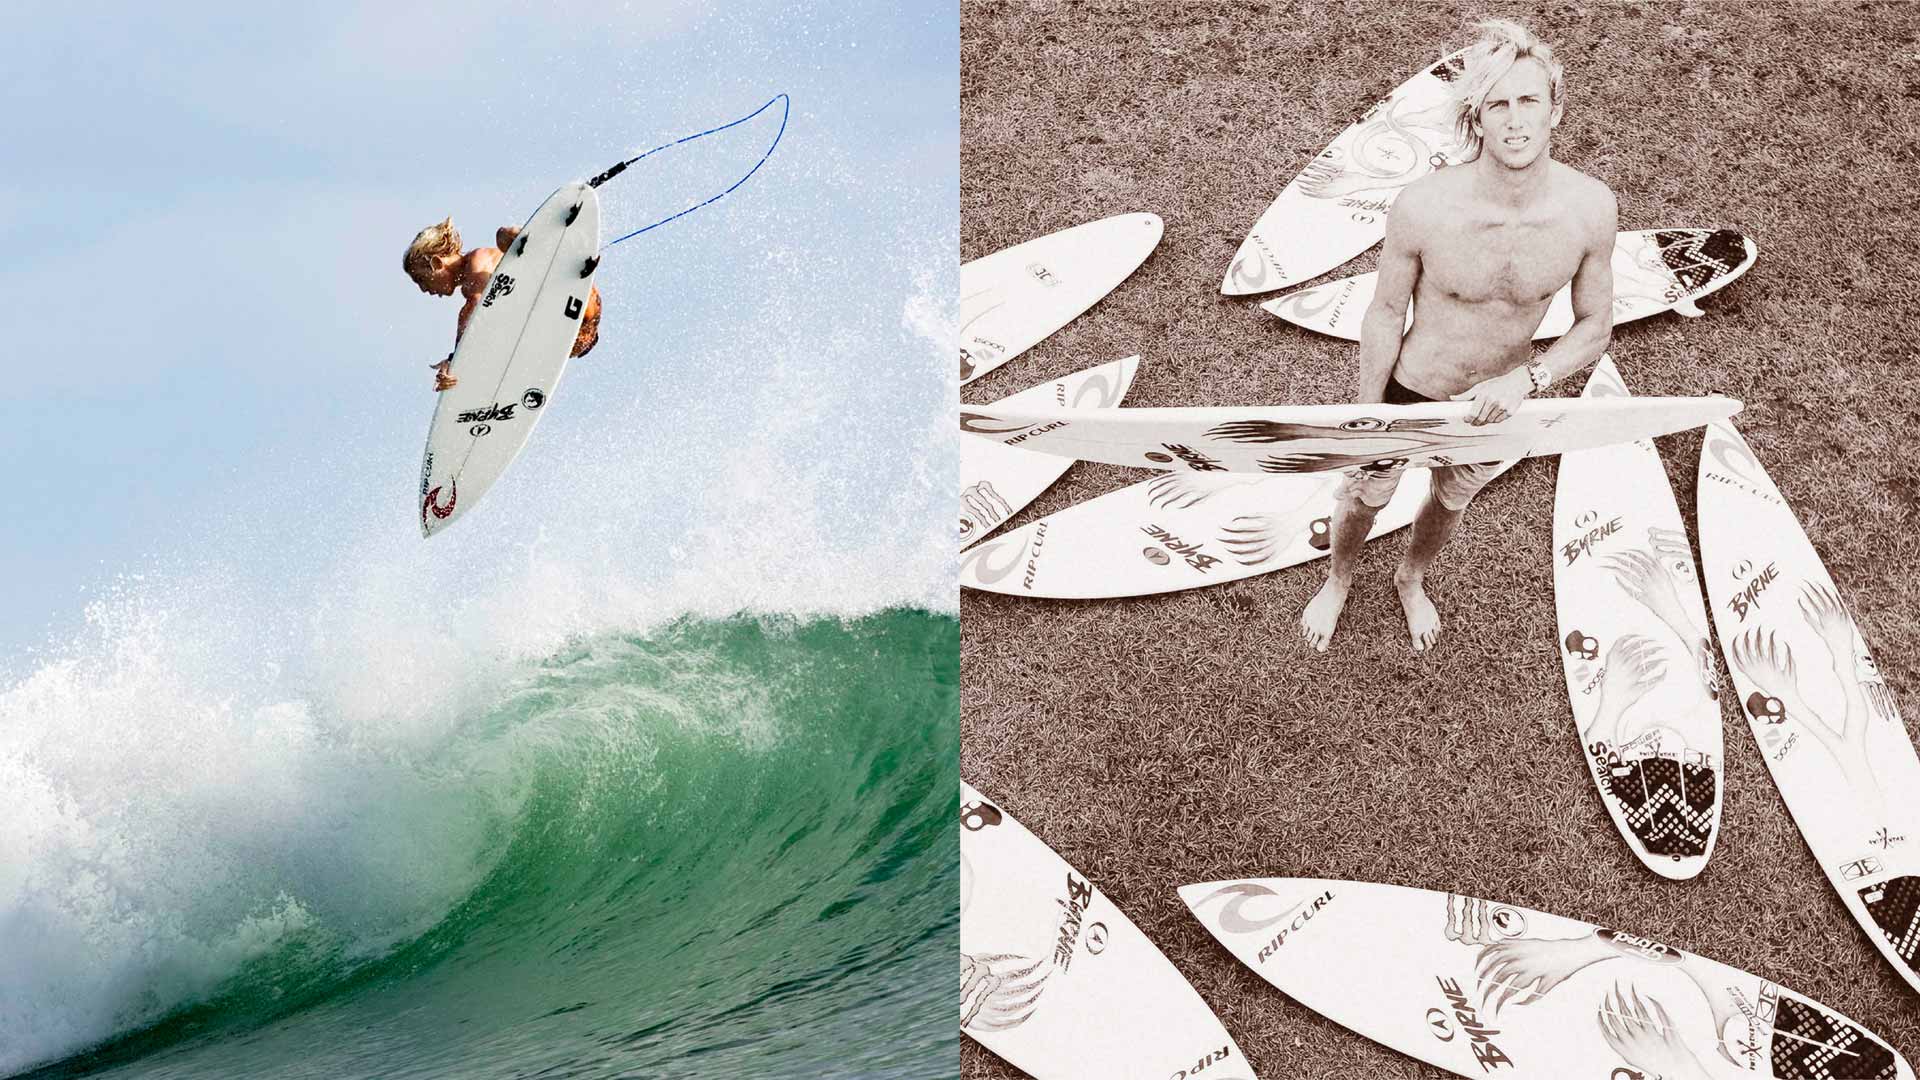 Split image of Owen Wright getting an air and him holding surfboards.